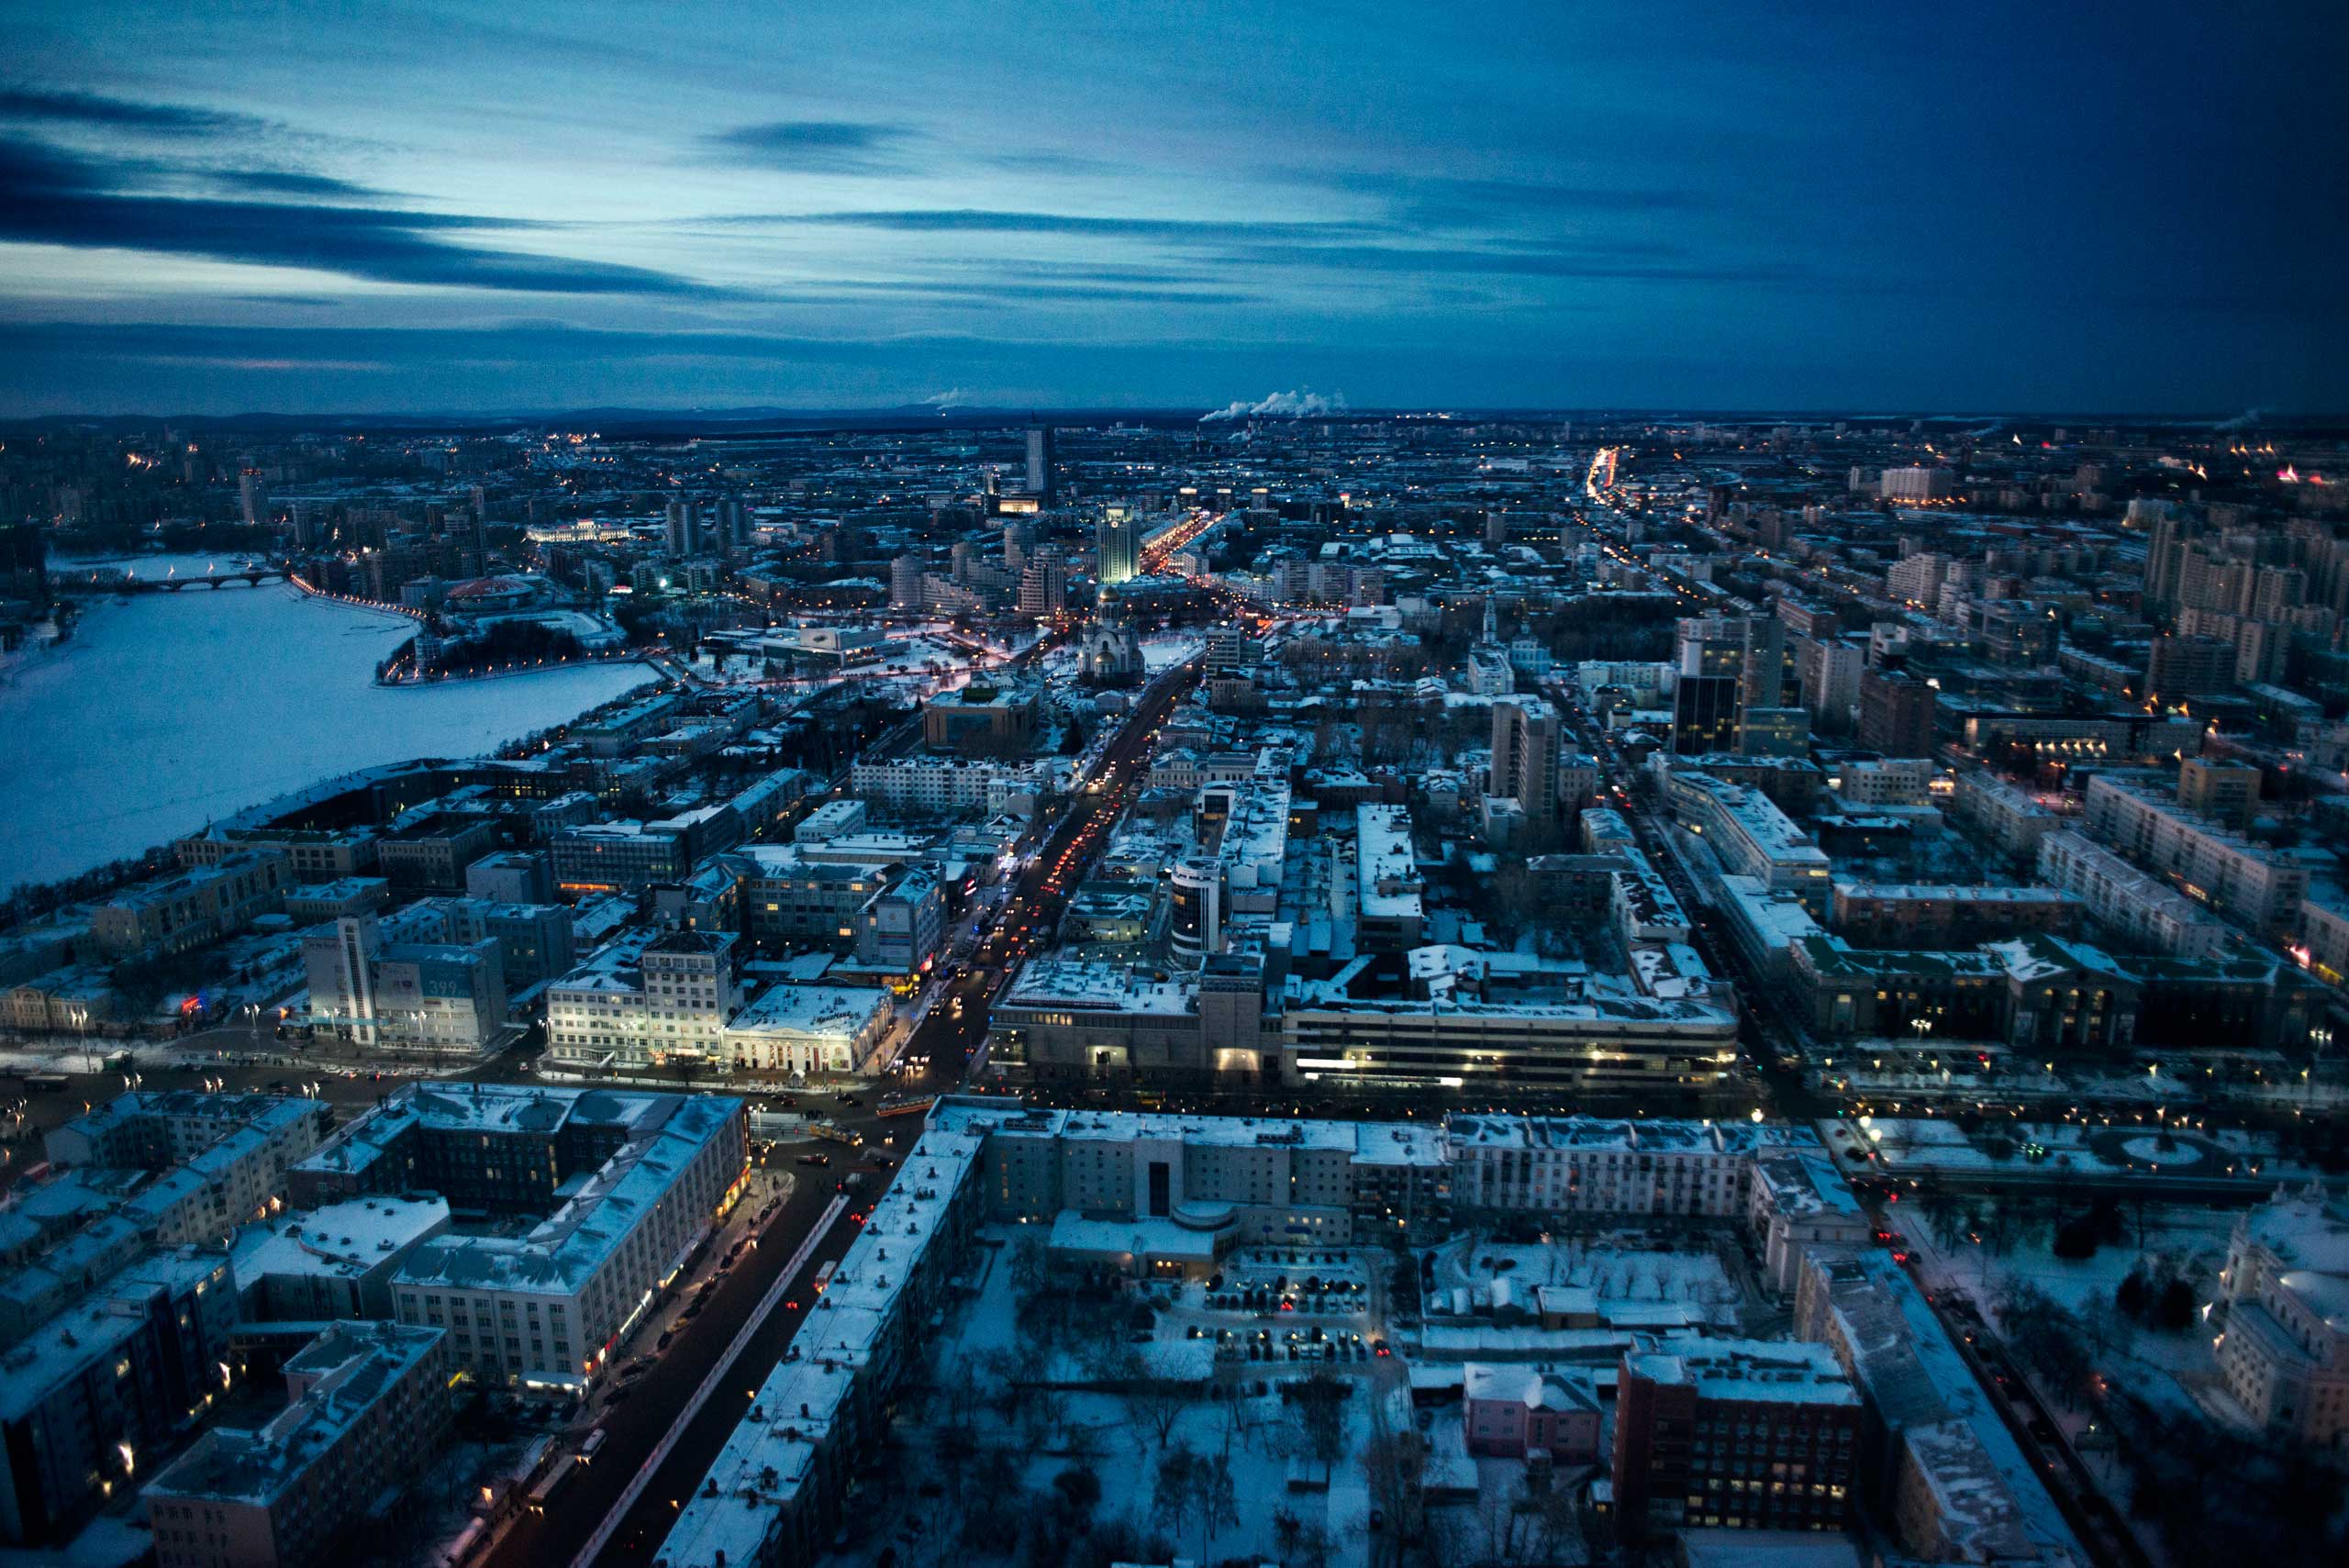 A view from the top of Yekaterinburg. The city, the regional capital, has about 1.5 million inhabitants and was the first Russian city in Asia. About 80 percent of the population of the region lives in Yekaterinburg. Registered drug addicts number about 40,000.